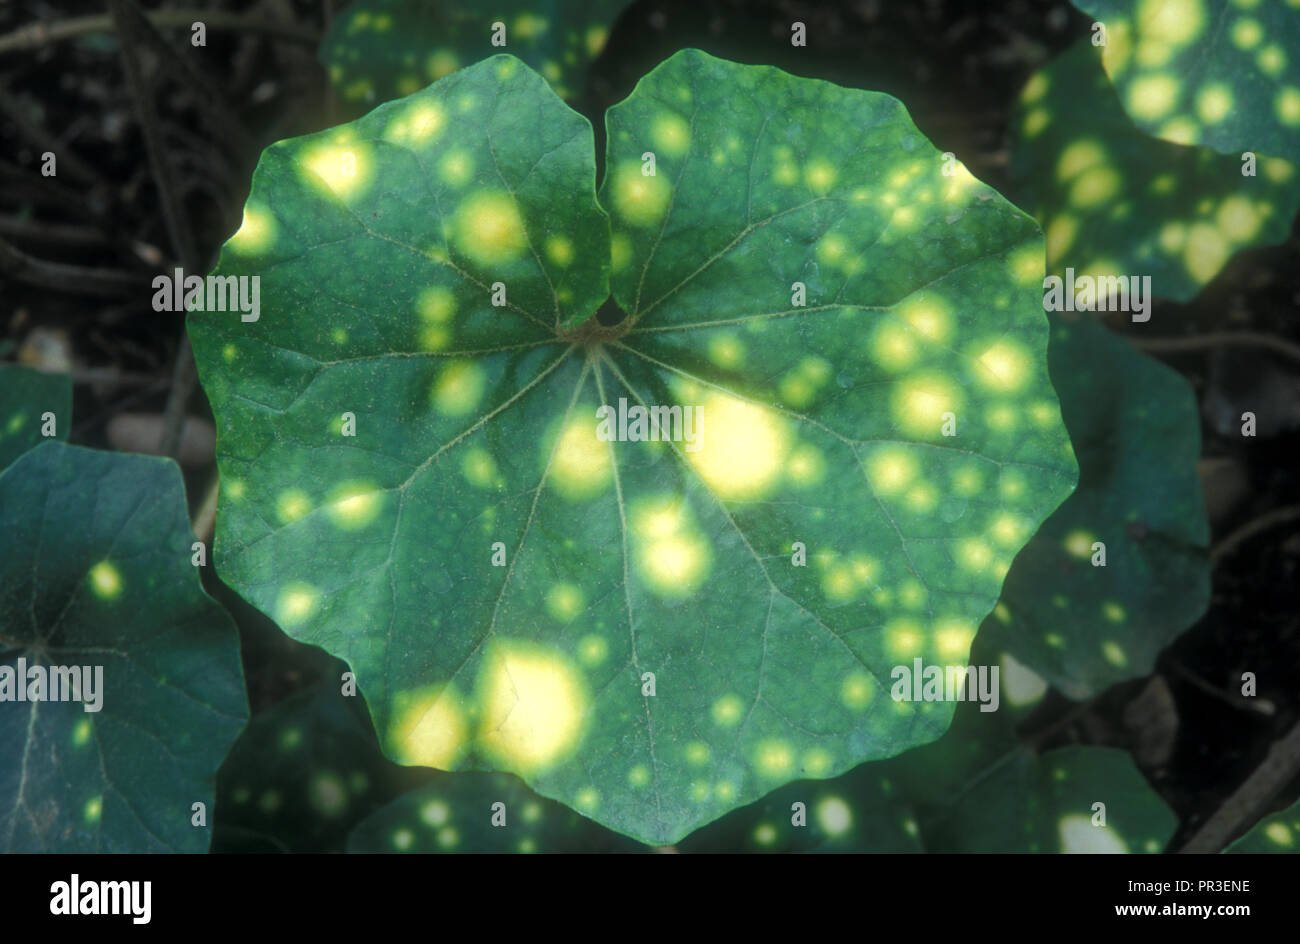 YELLOW SPOTS ON THE LEAVES OF A NASTURTIUM PLANT Stock Photo